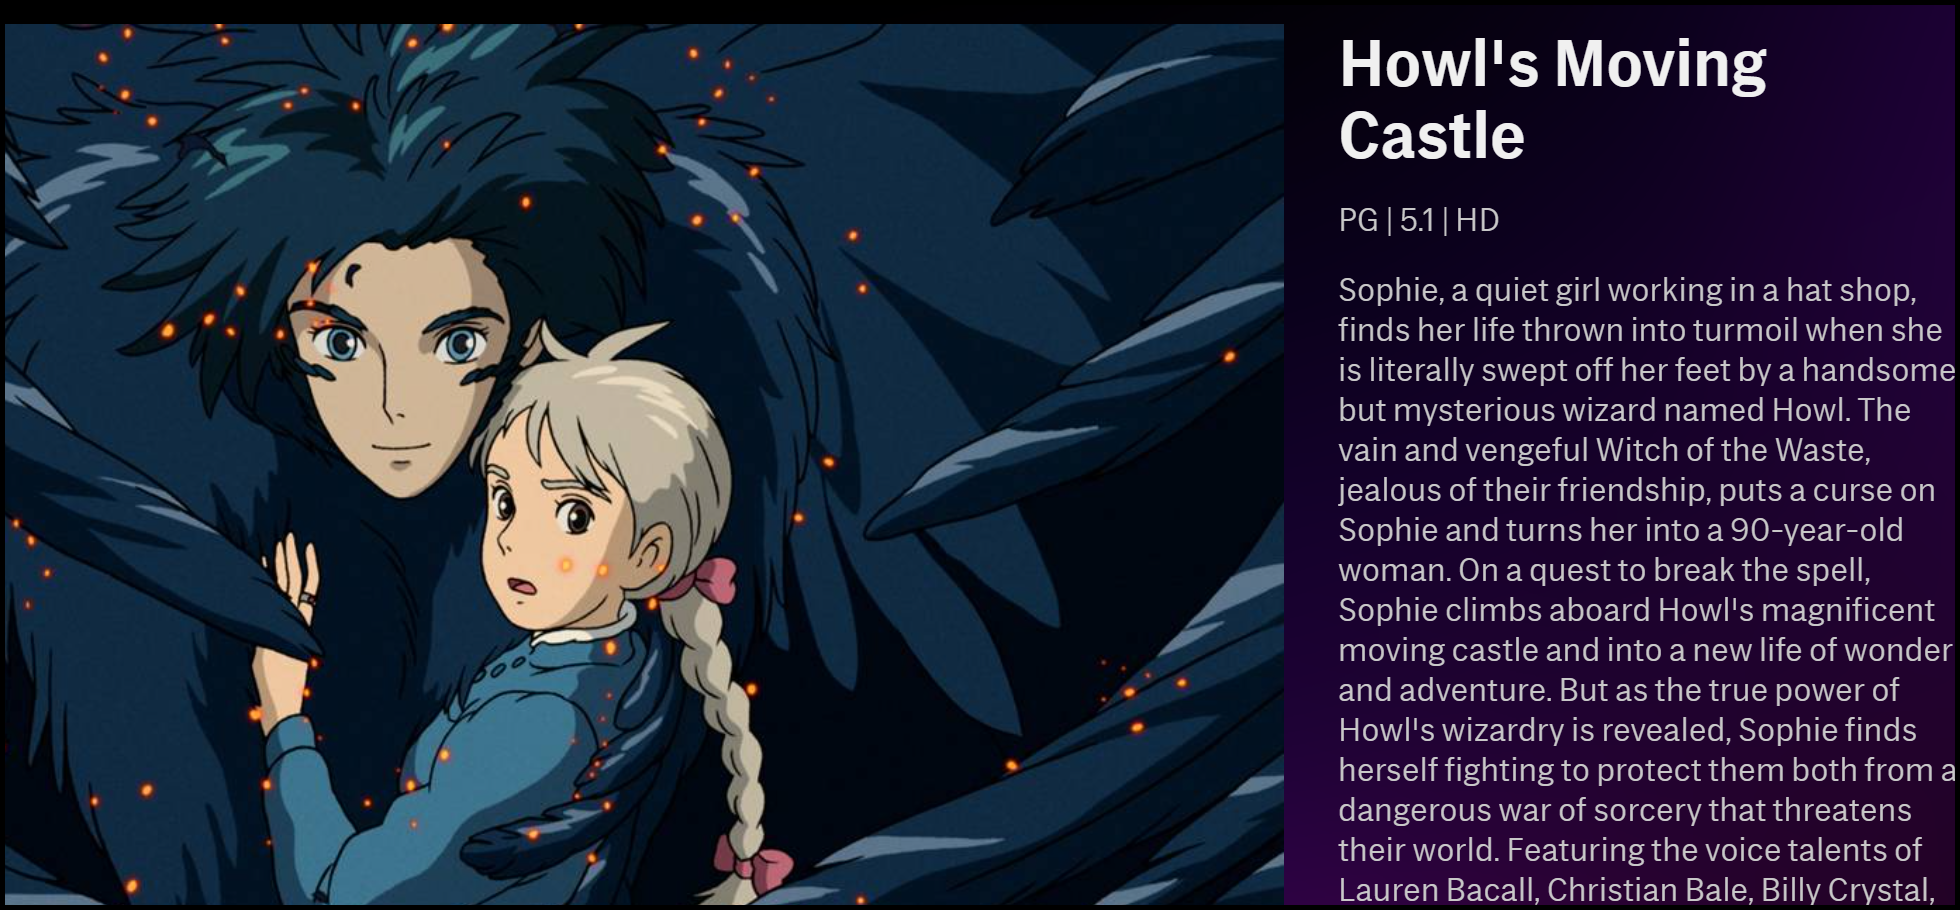 The description of Howl's Moving Castle on HBO Max.